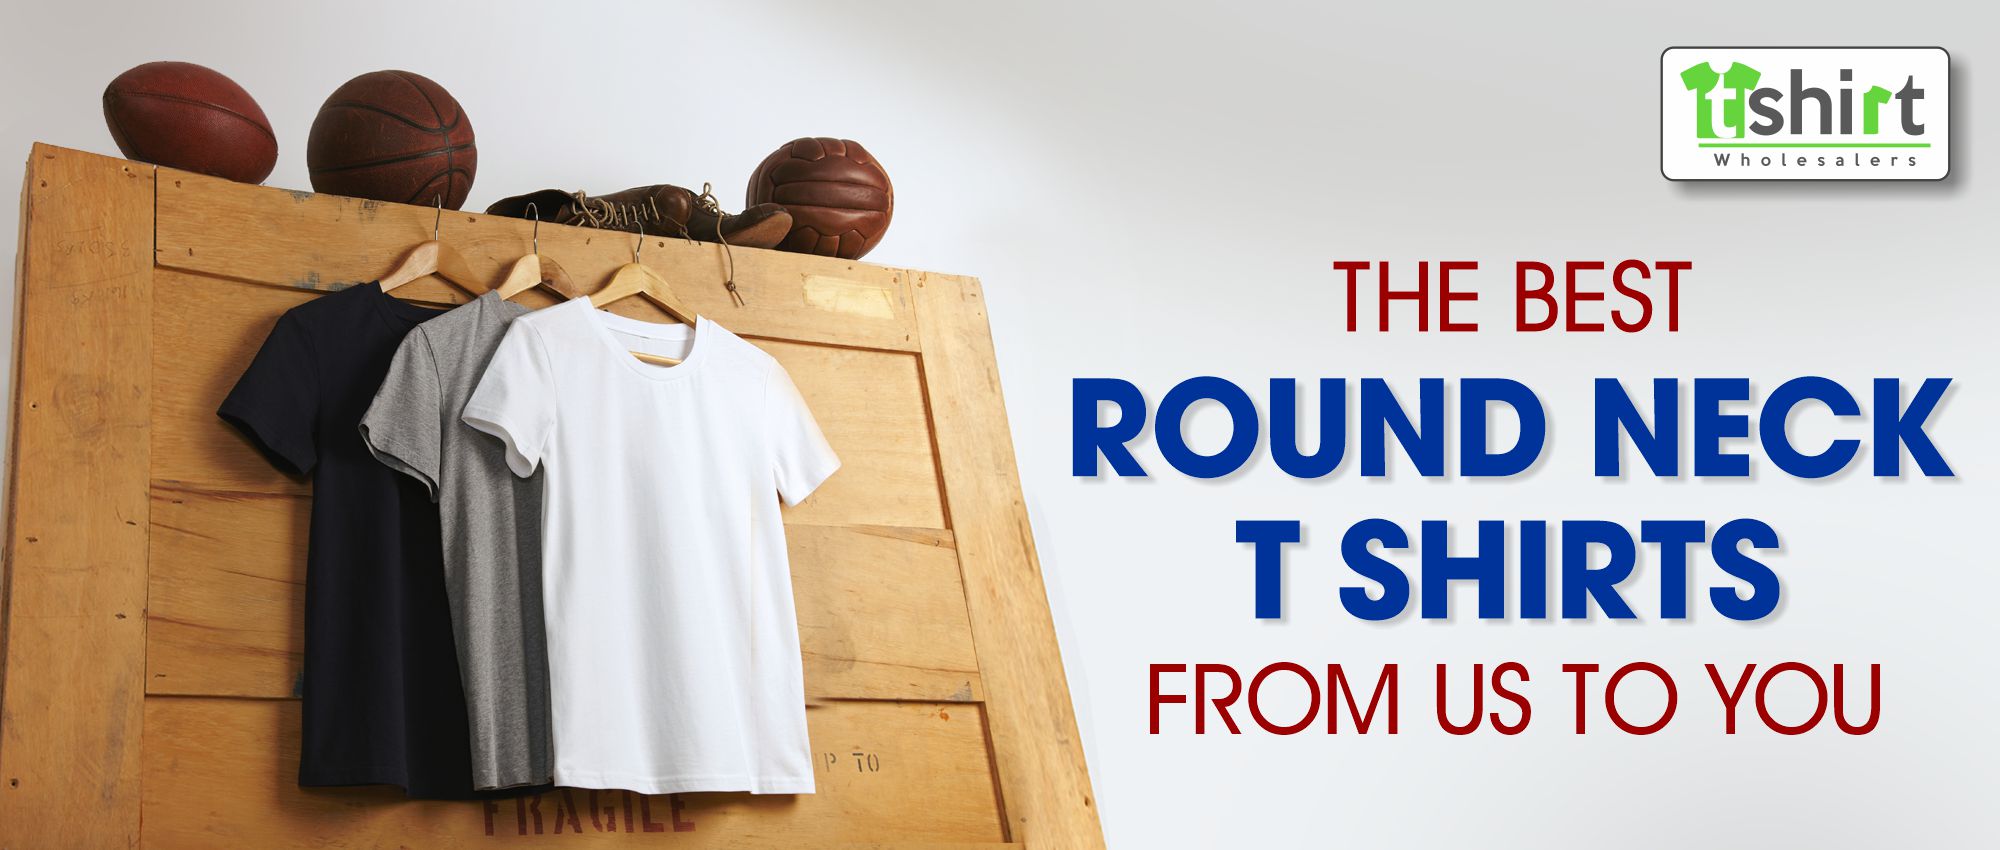 THE BEST ROUND NECK T SHIRTS – FROM US TO YOU